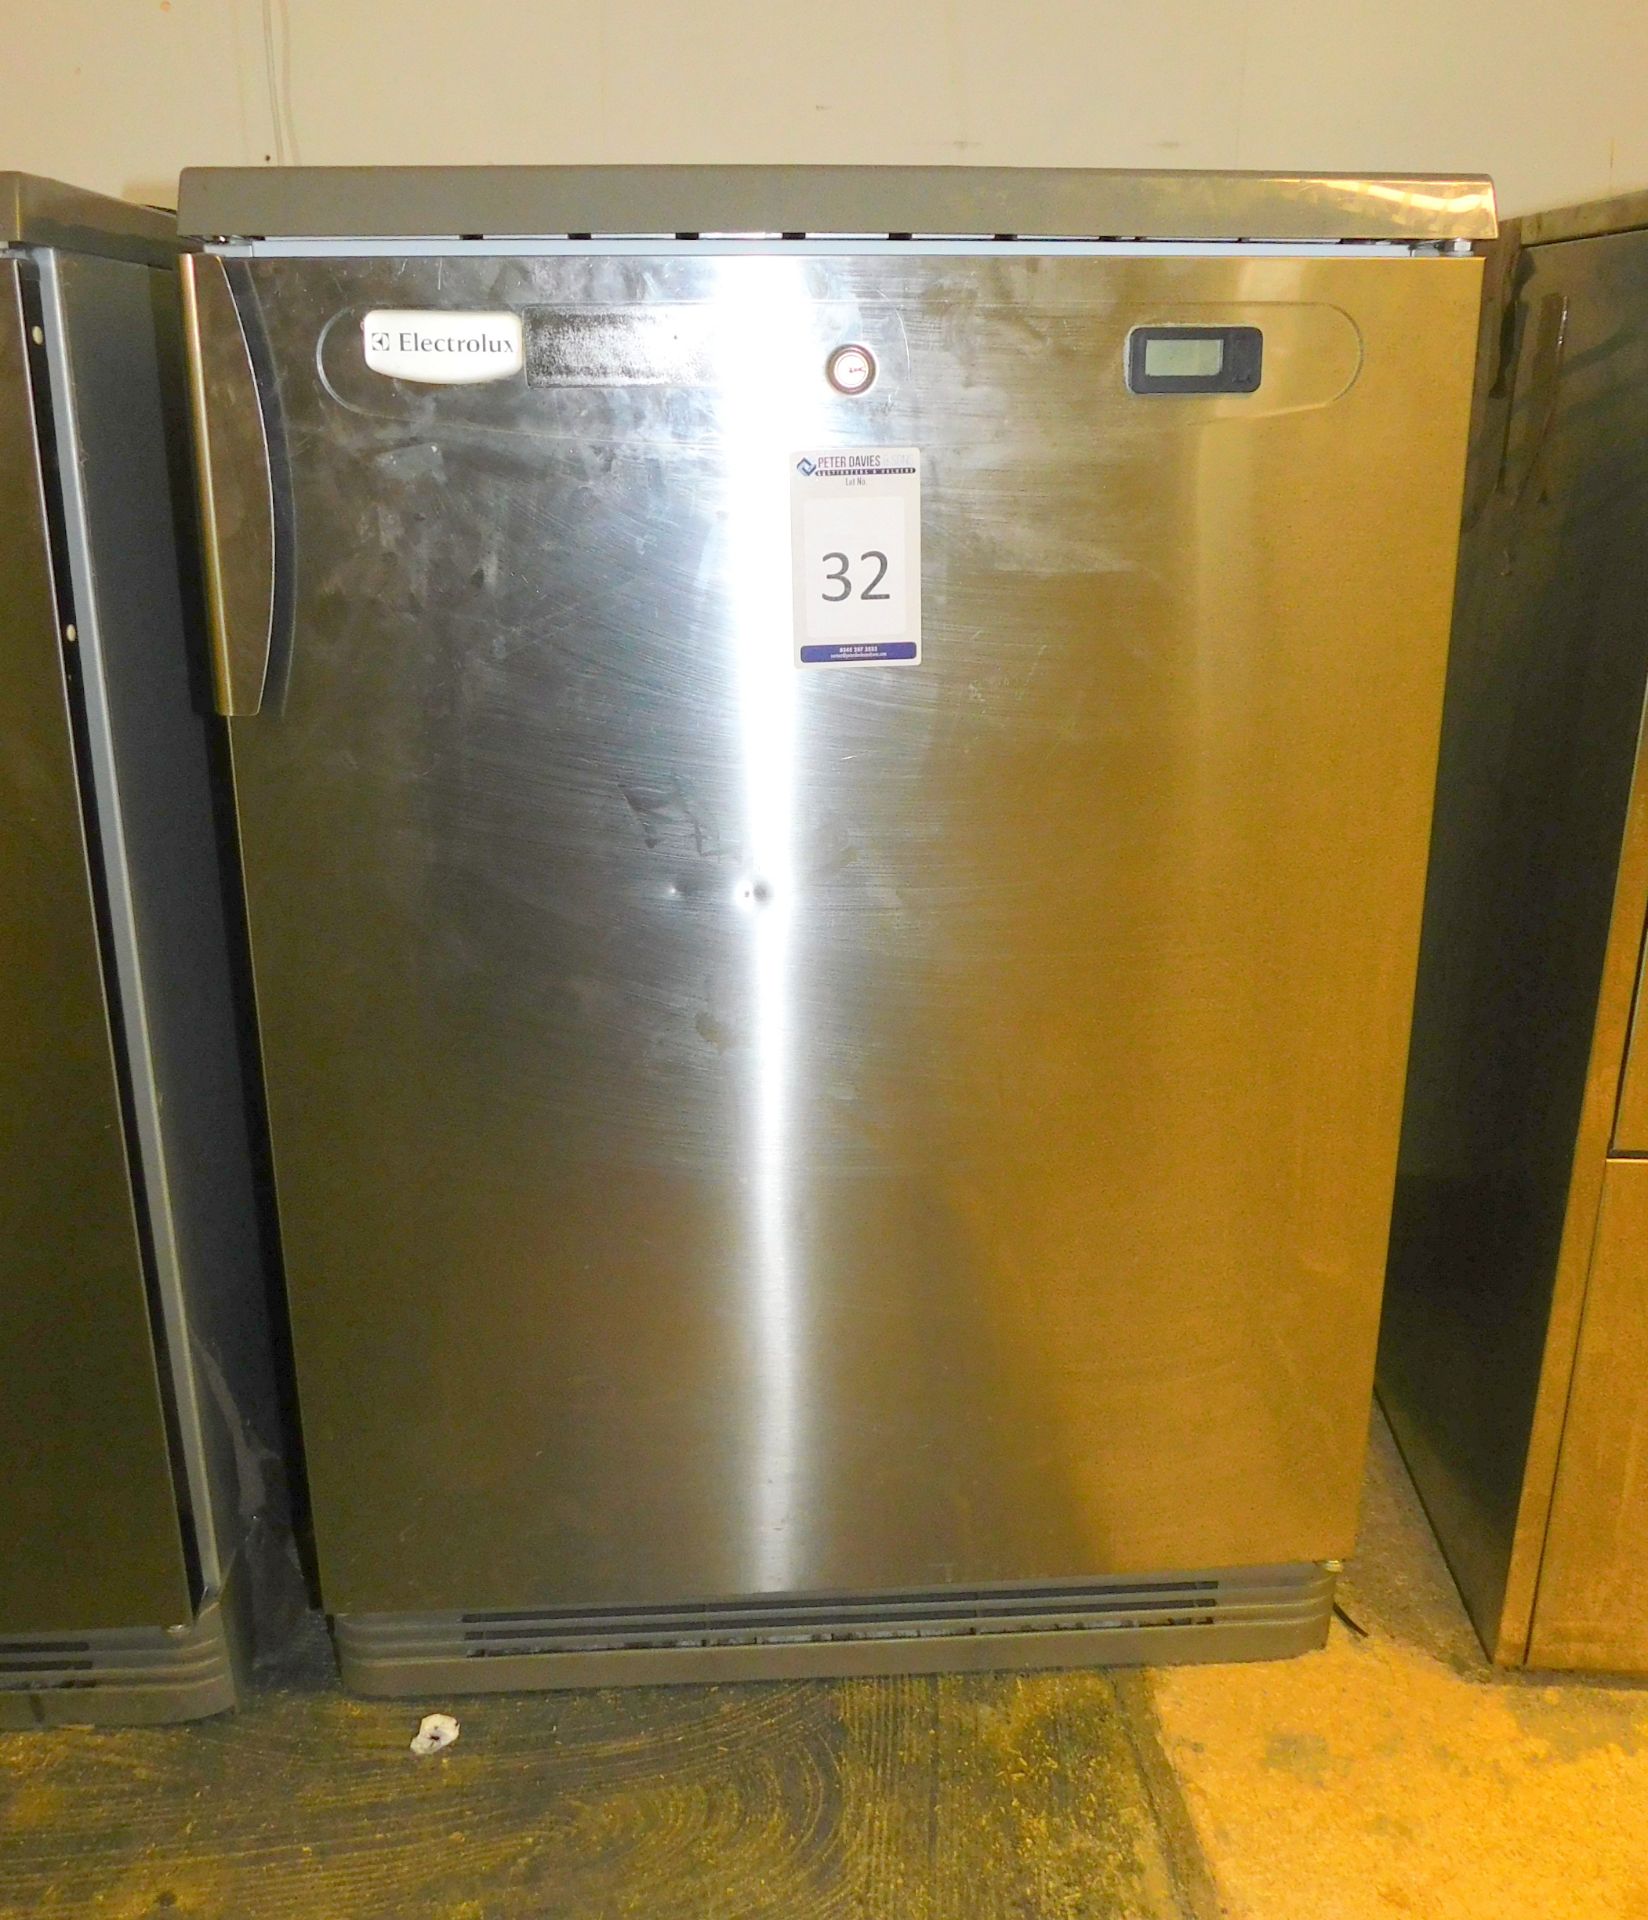 Electrolux RUCR16X1G Under Counter Refrigerator with Stainless Steel Door, 2015, Serial Number: